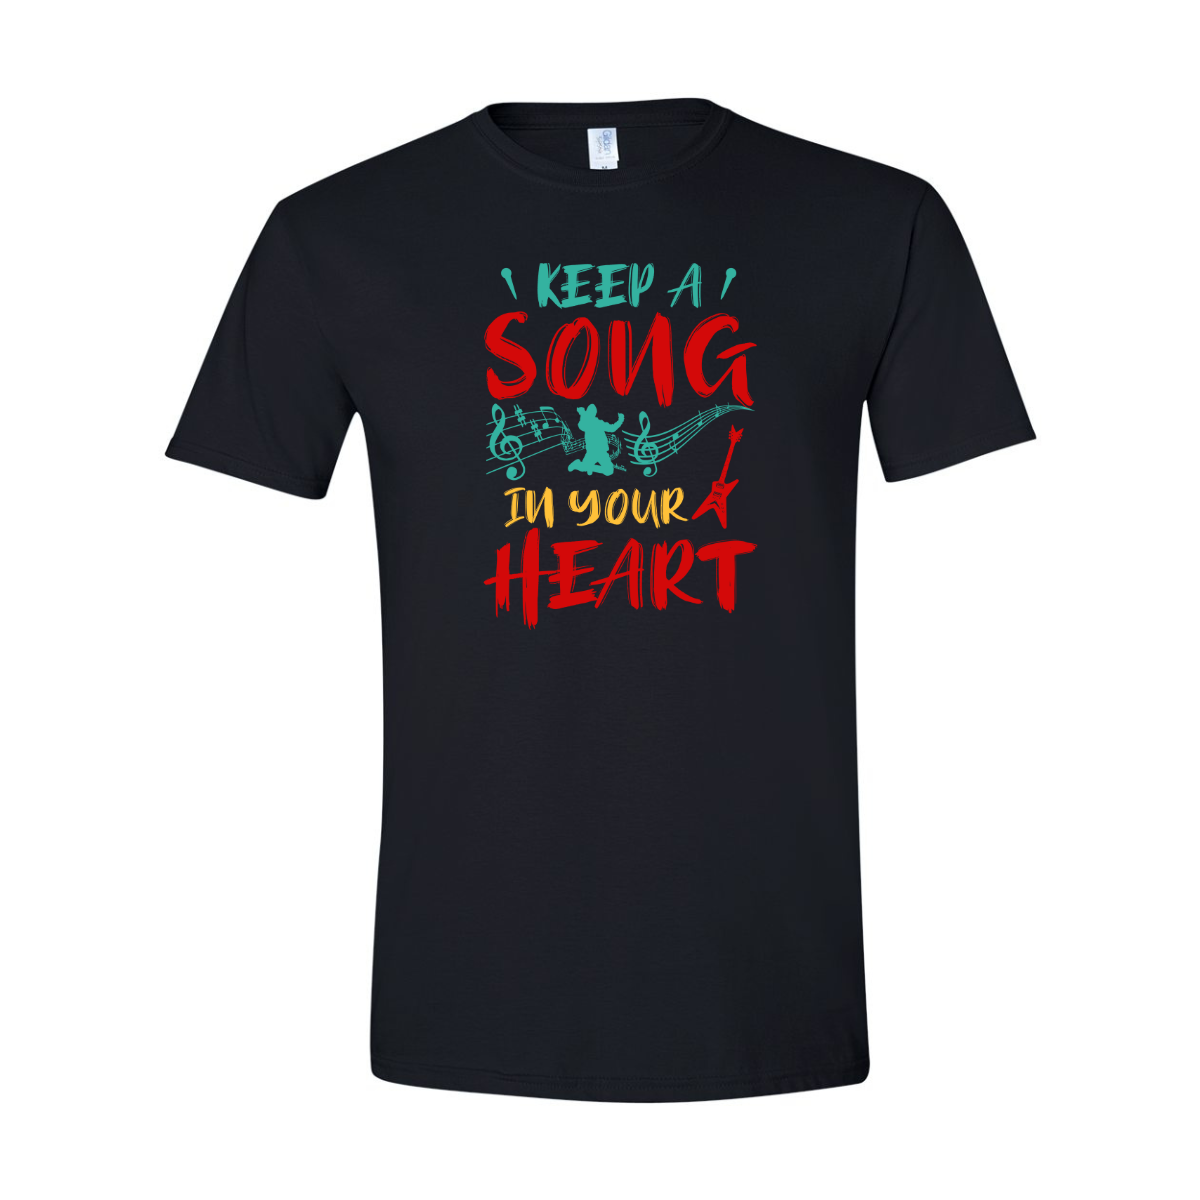 ADULT Unisex T-Shirt MUSA022 KEEP A SONG IN YOUR HEART